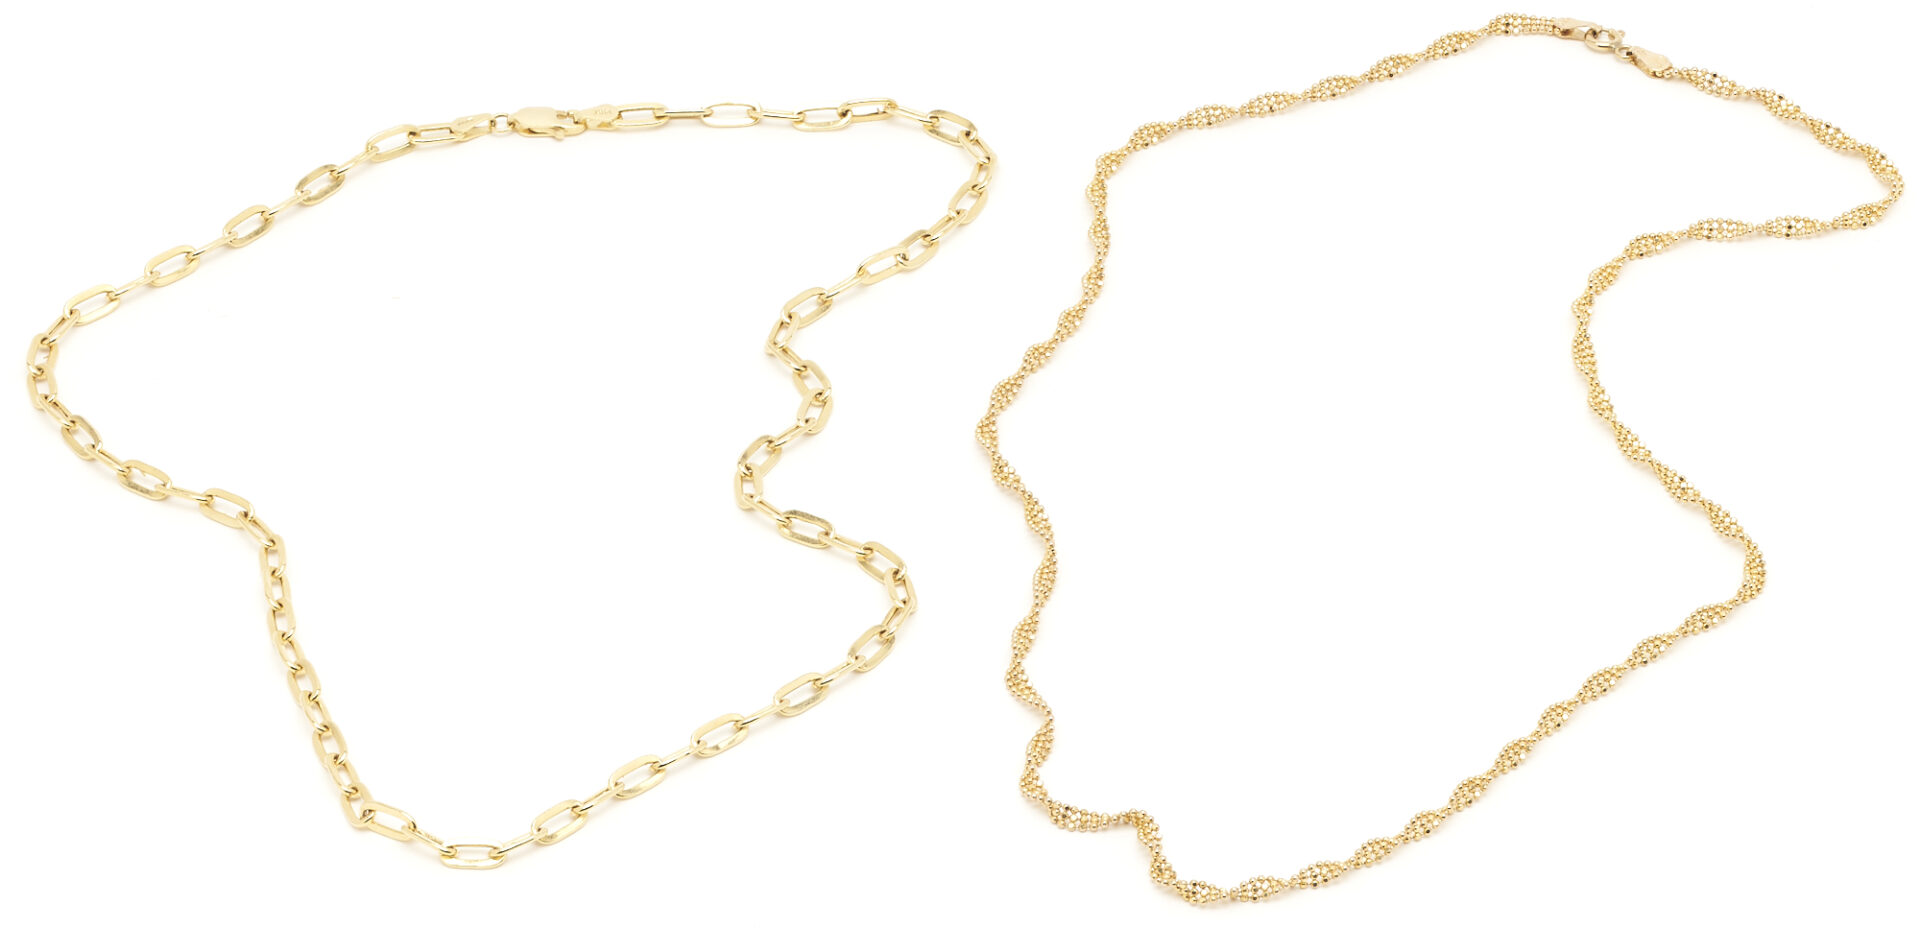 Lot 903: Group of 4 Yellow Gold Necklaces, 18K, 14K, 9K